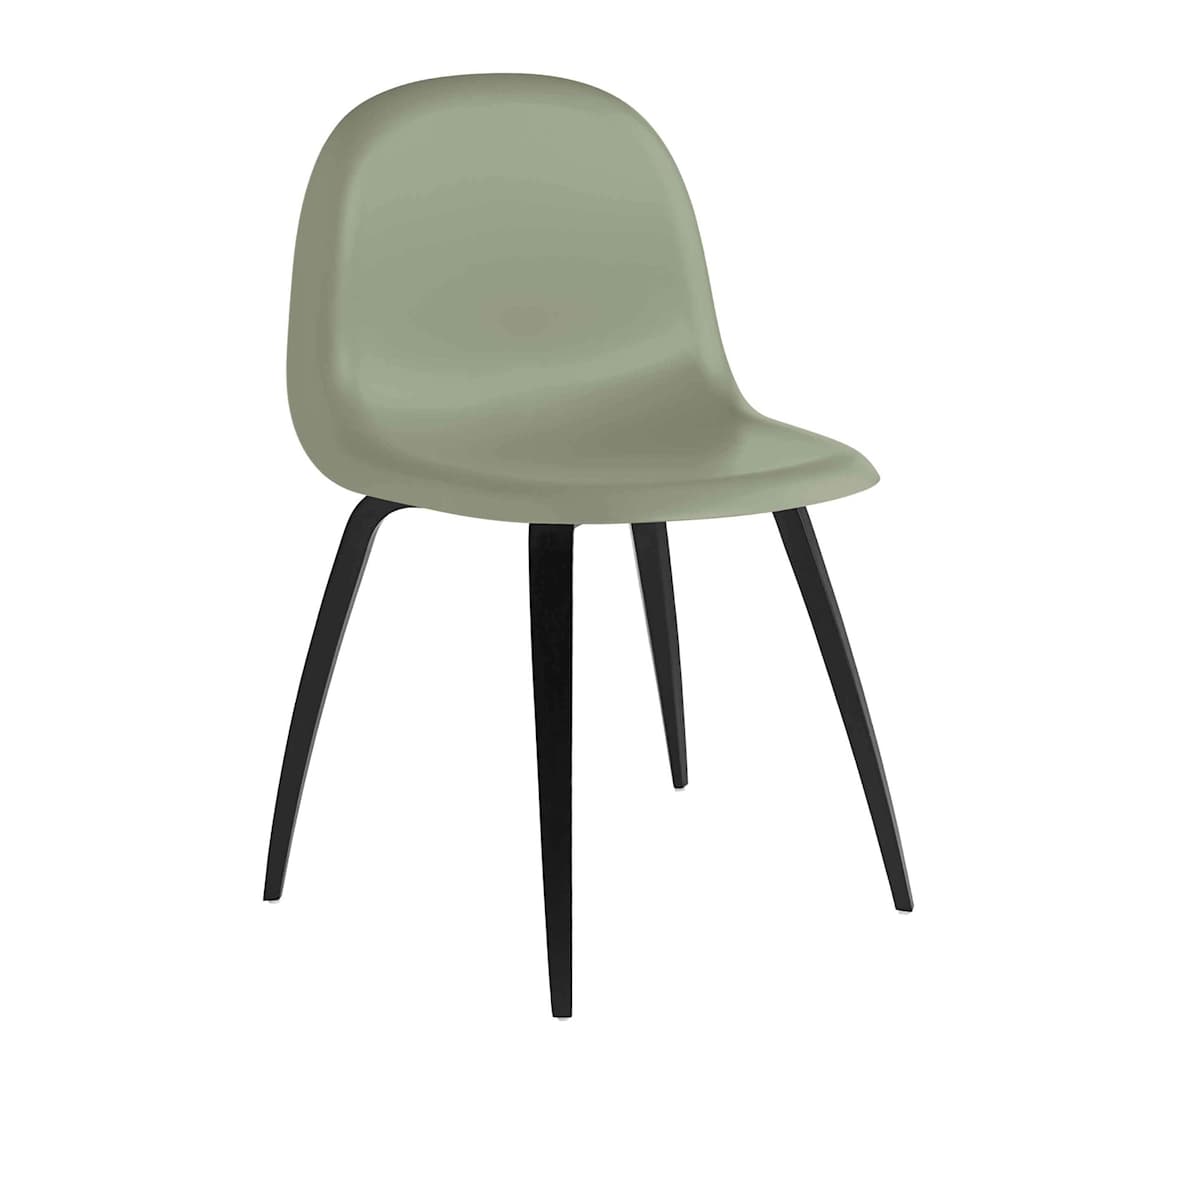 3D Dining Chair Wood Base - Un-upholstered